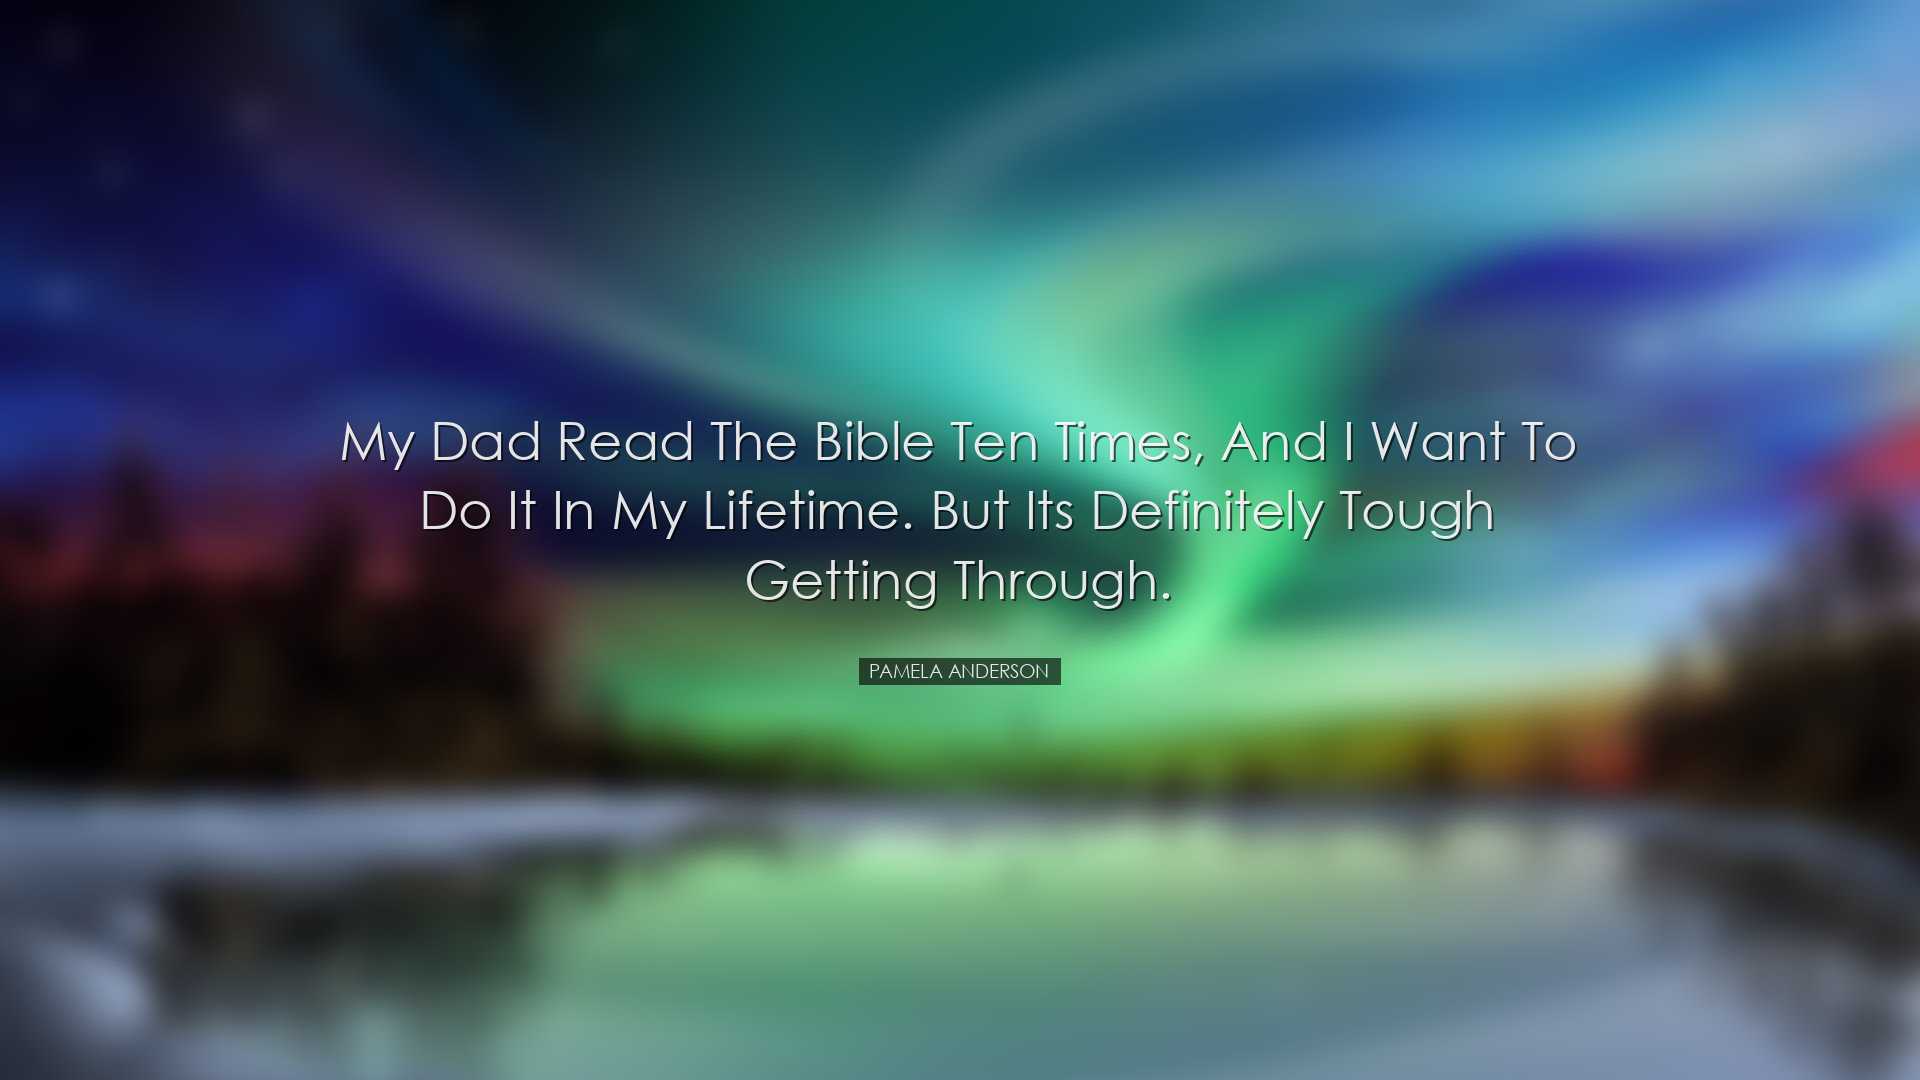 My dad read the Bible ten times, and I want to do it in my lifetim